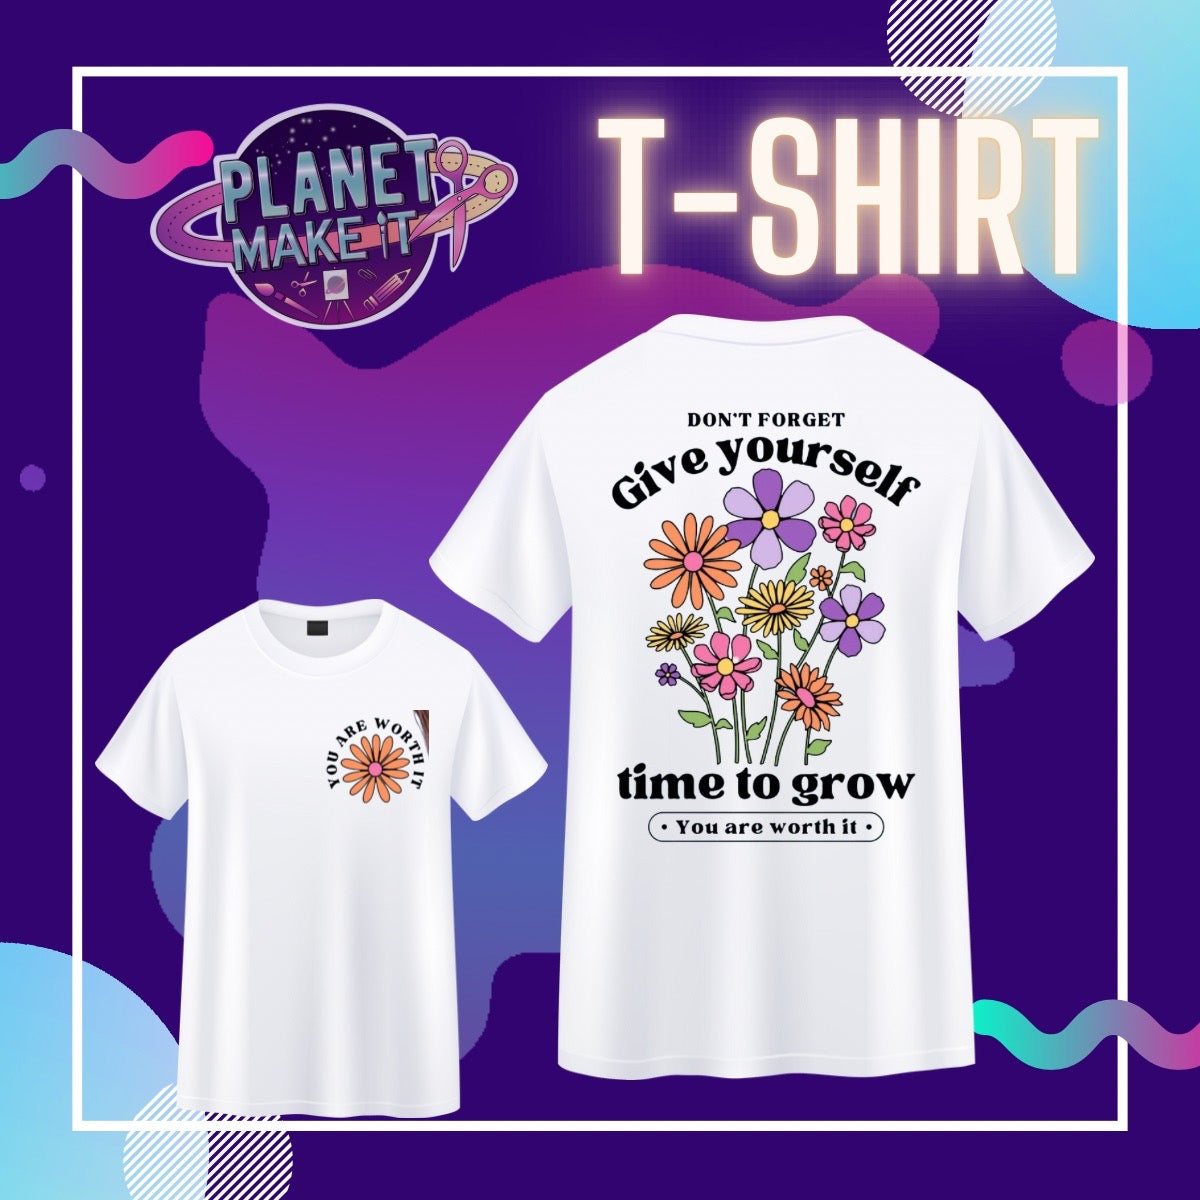 Give Yourself Time To Grow - T-Shirt